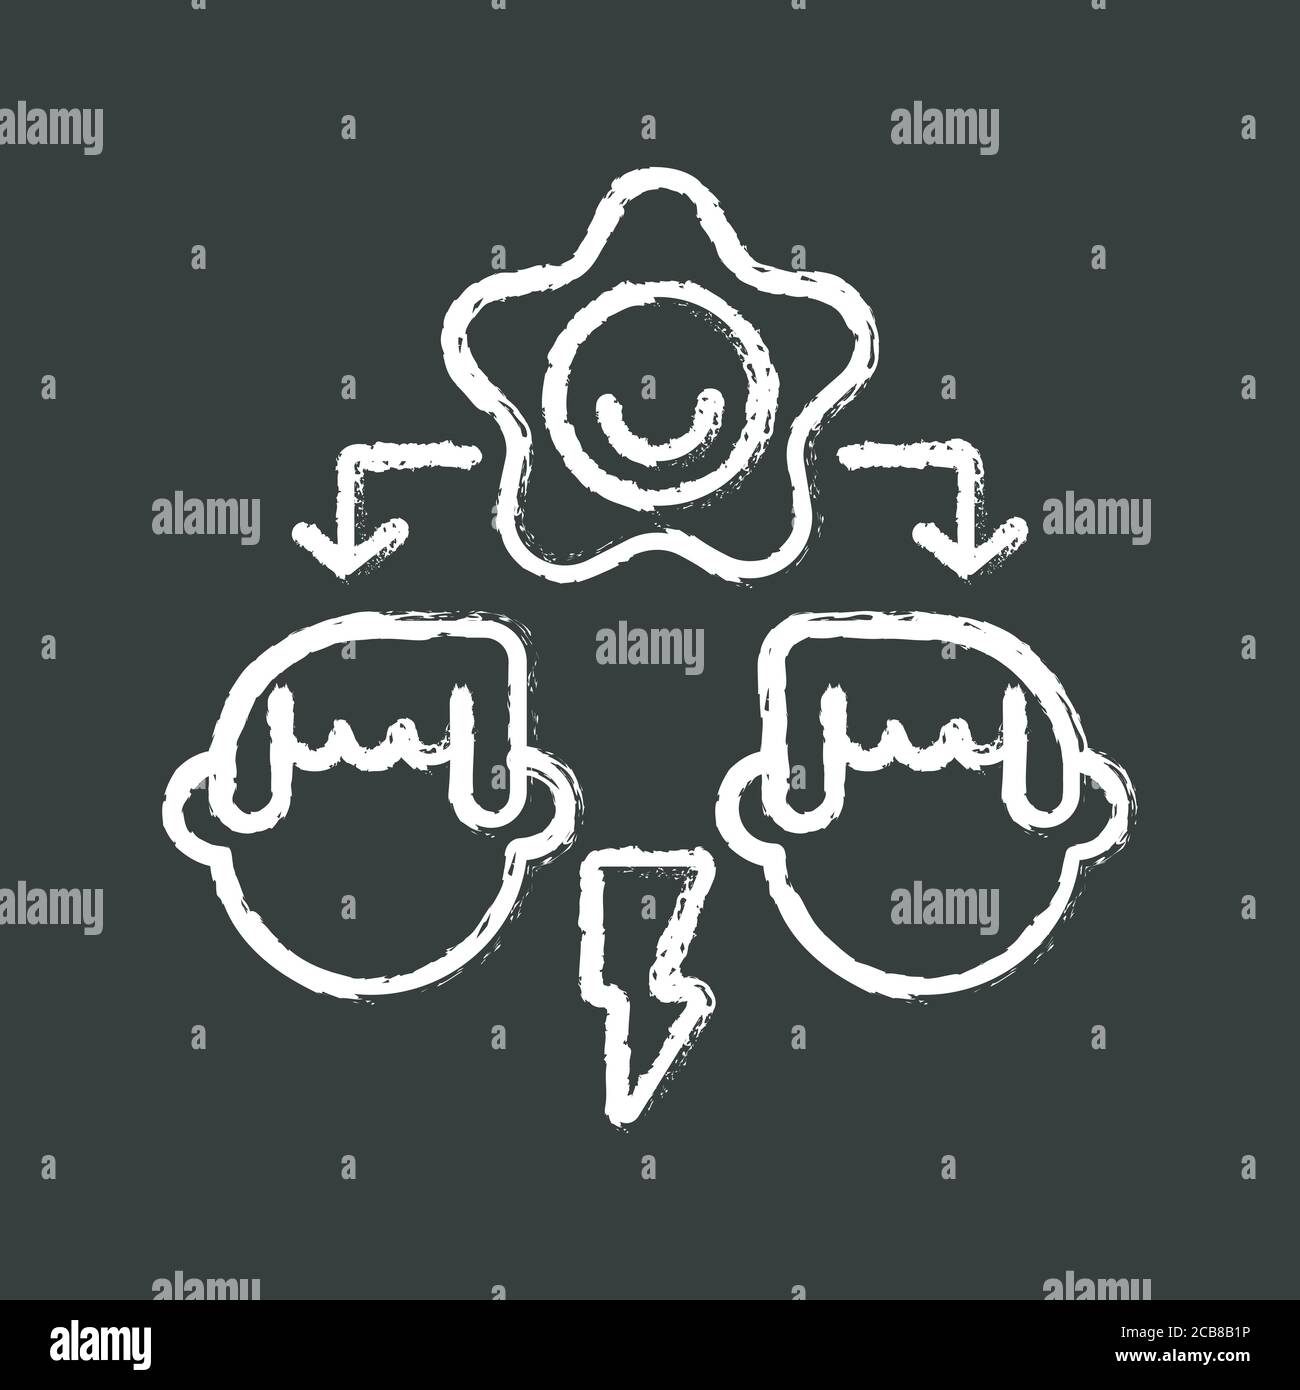 Conflict resolution chalk white icon on black background. Communication skills, problem solving, reconciliation. Family therapy, consultation service. Stock Vector